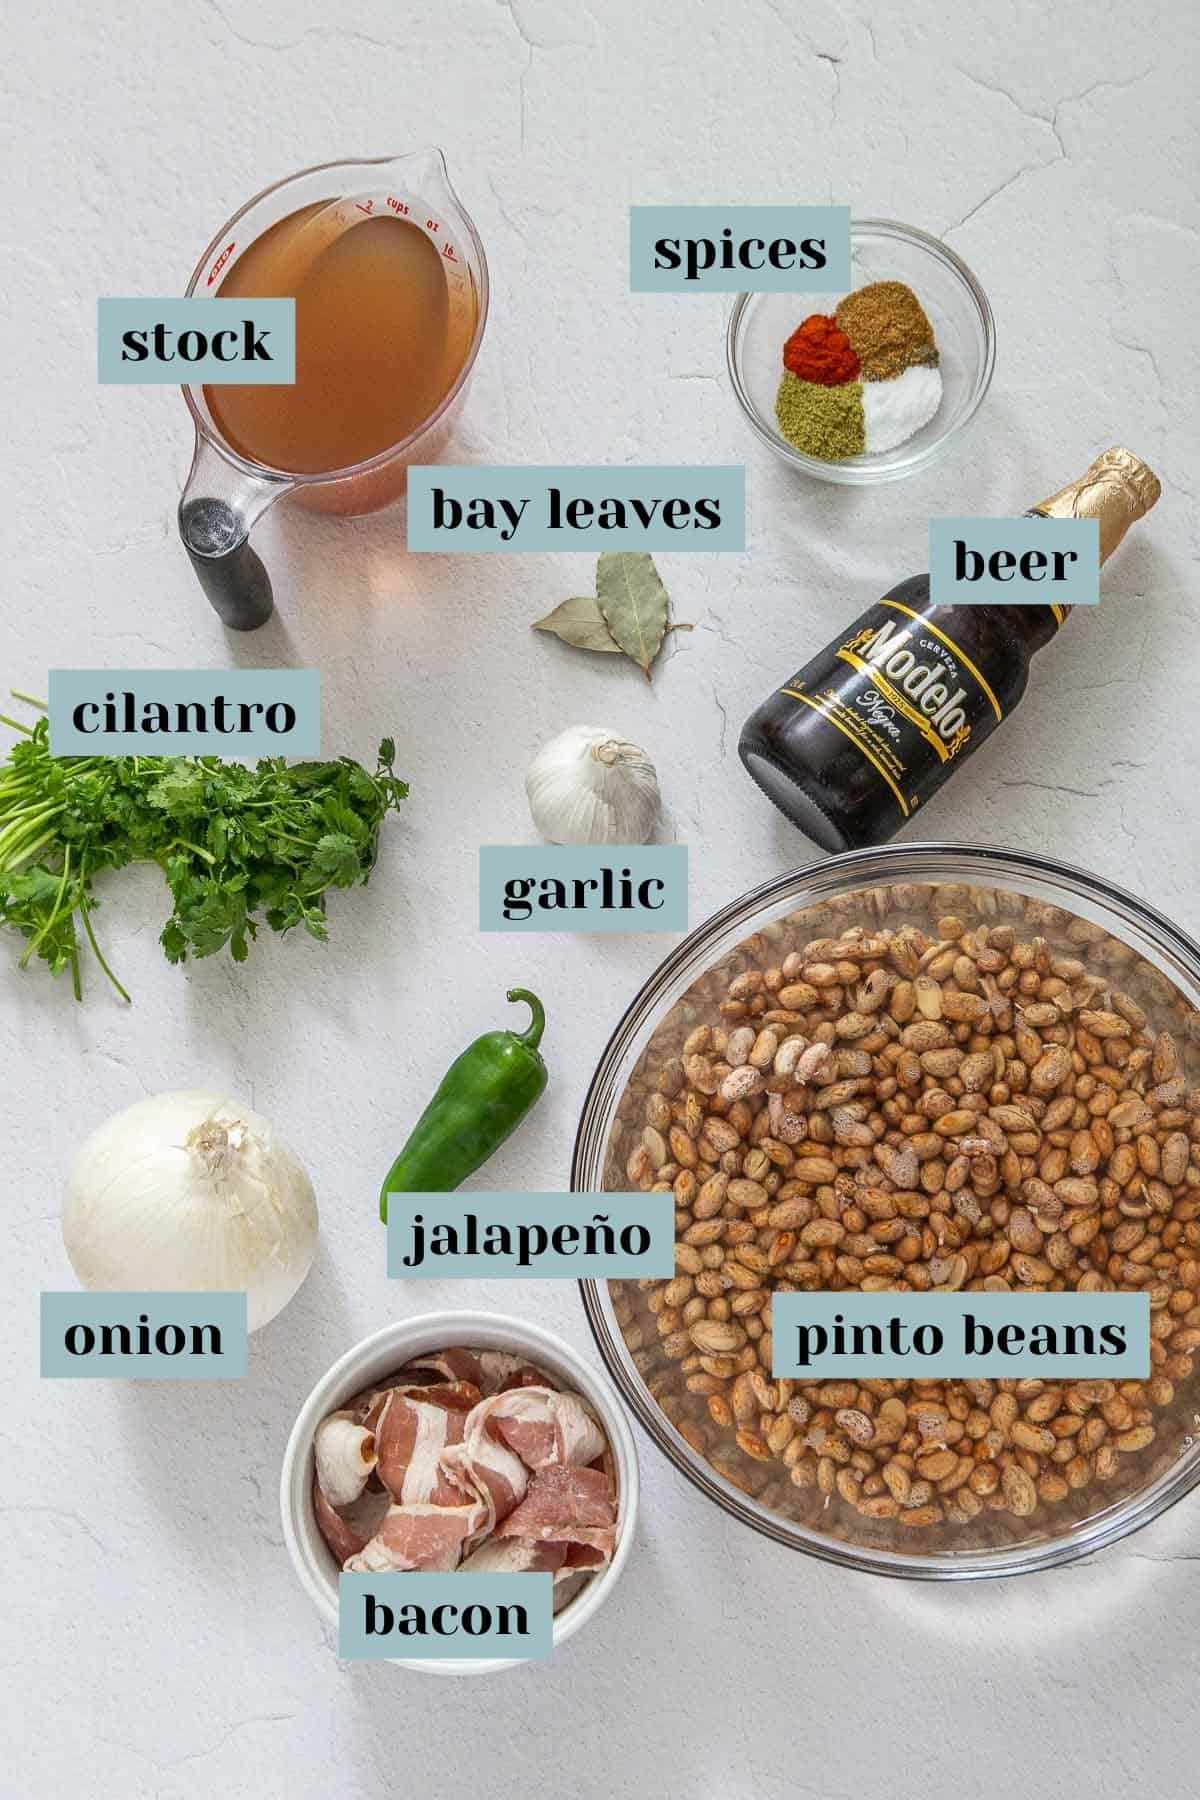 borracho bean ingredients with labels